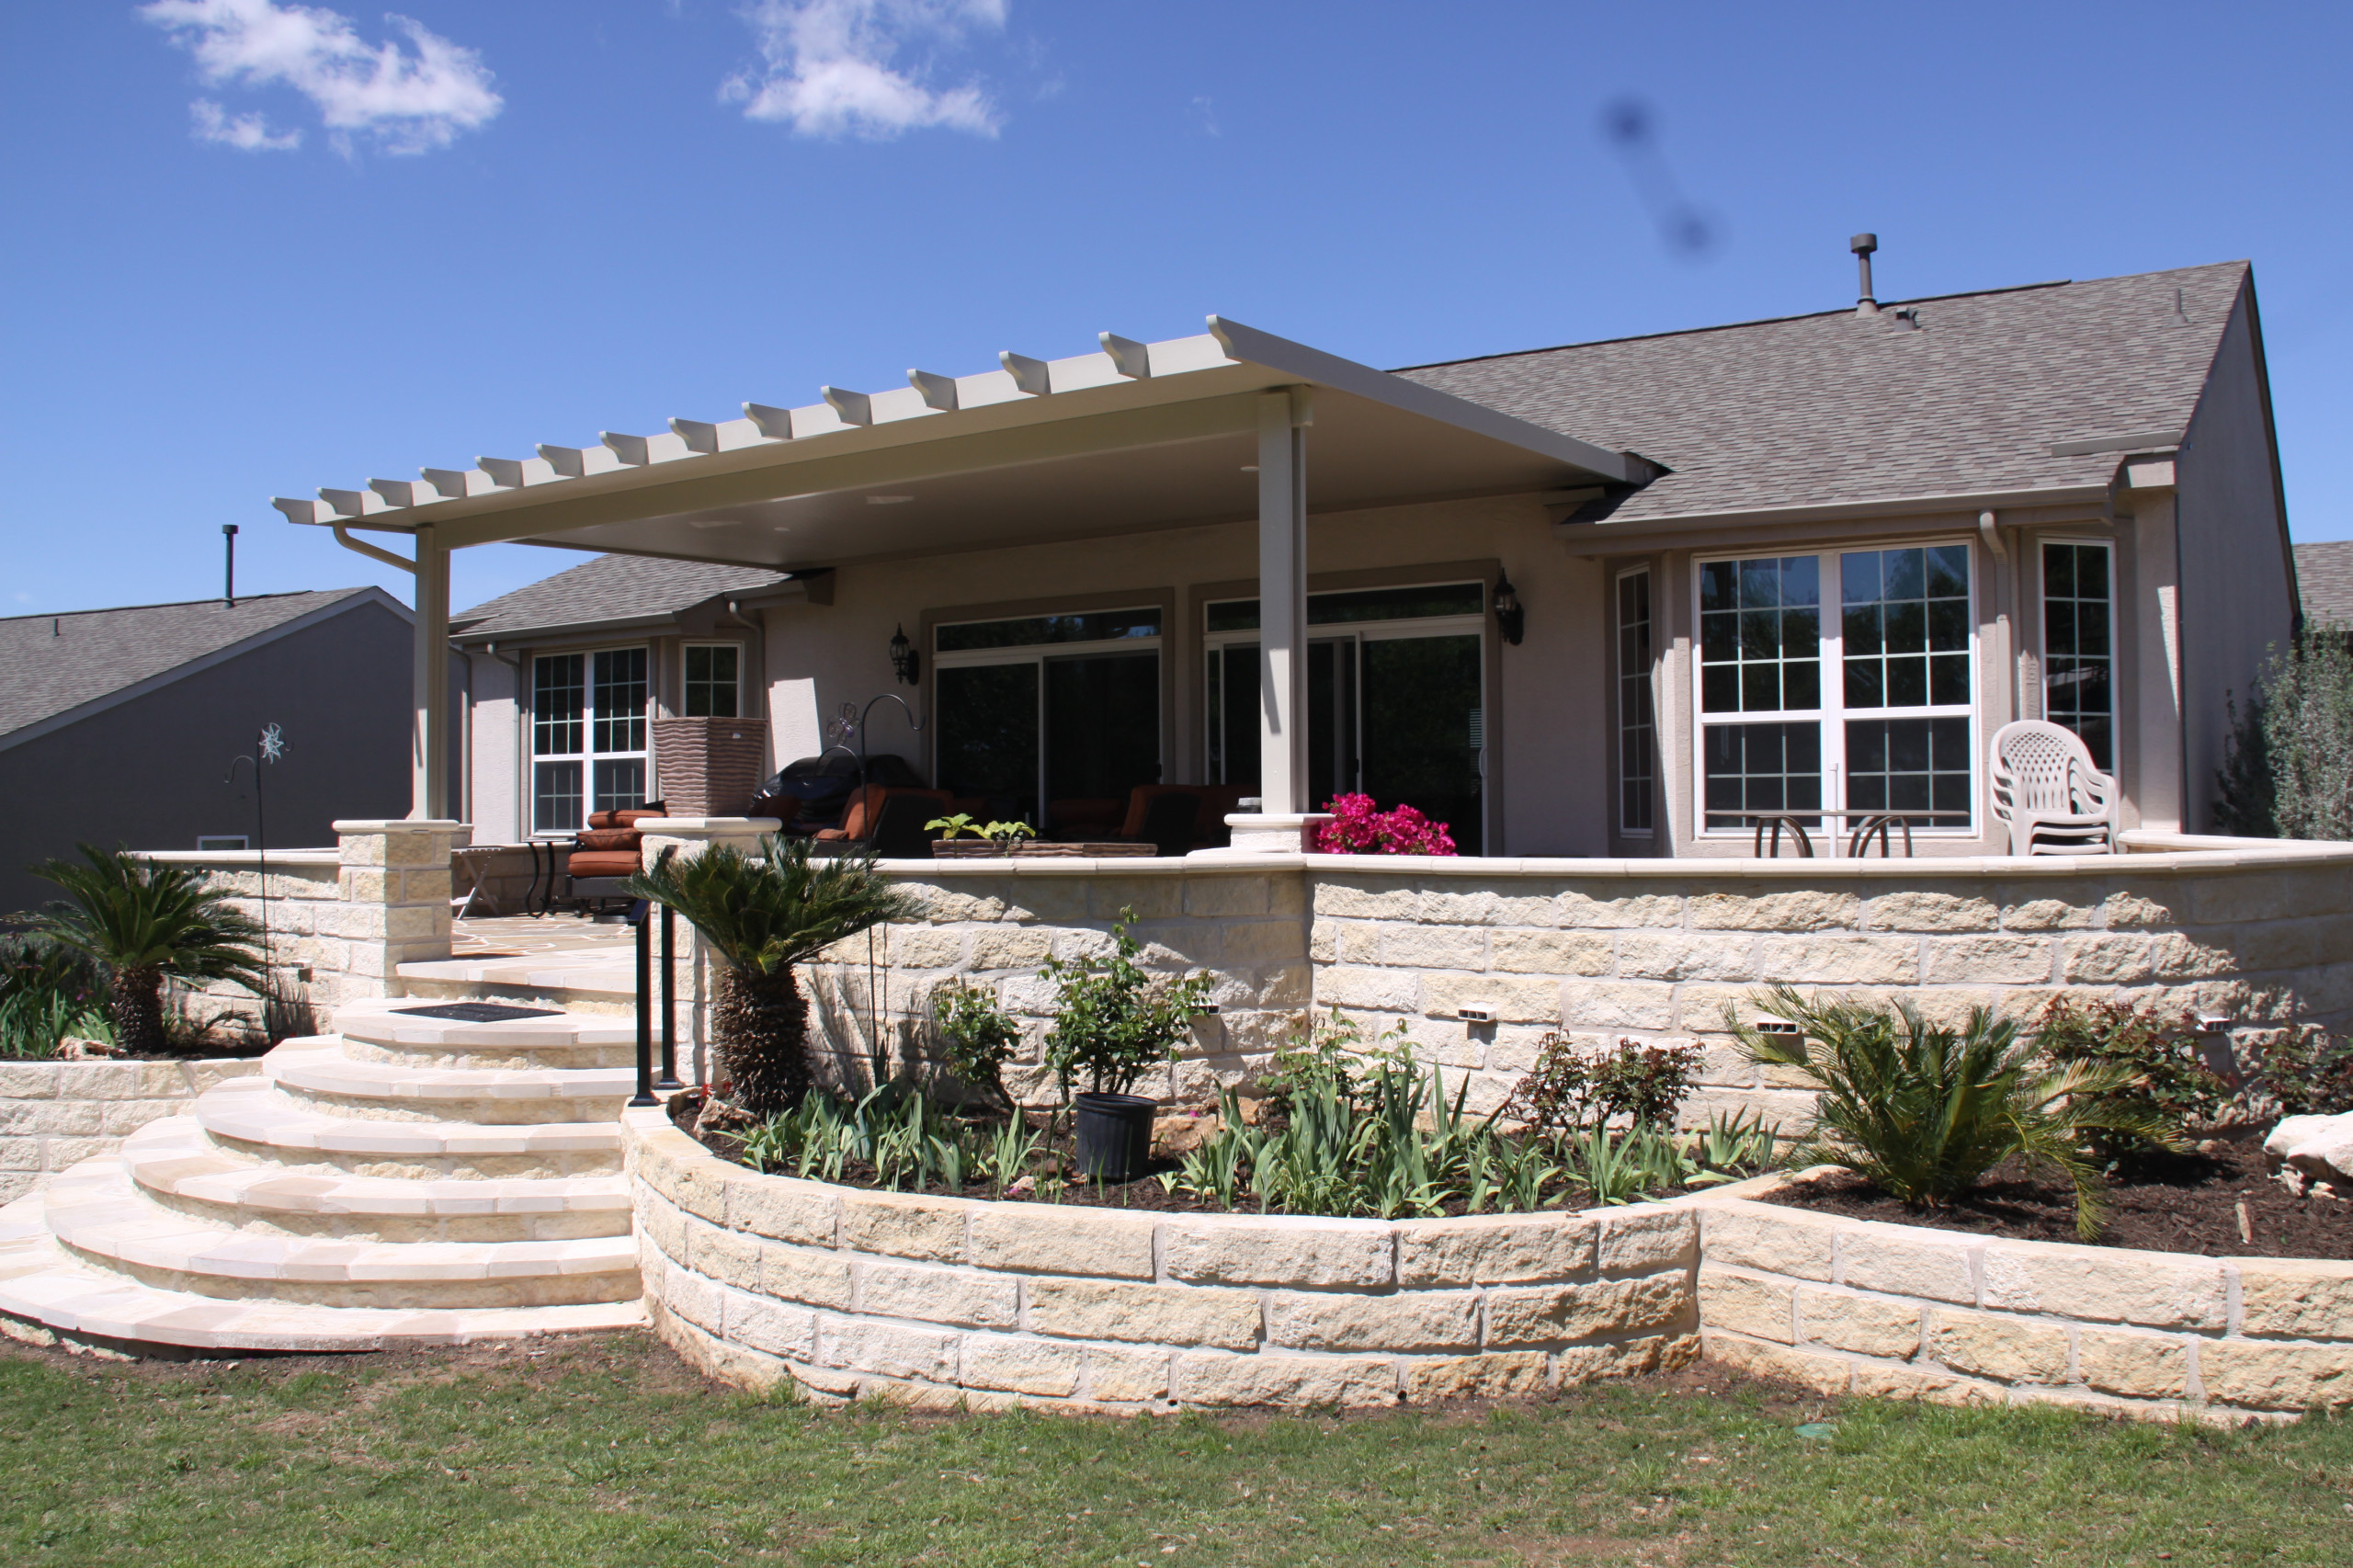 flagstone patio, limestone seatwalls and raised beds with "solid" Alumawood cano